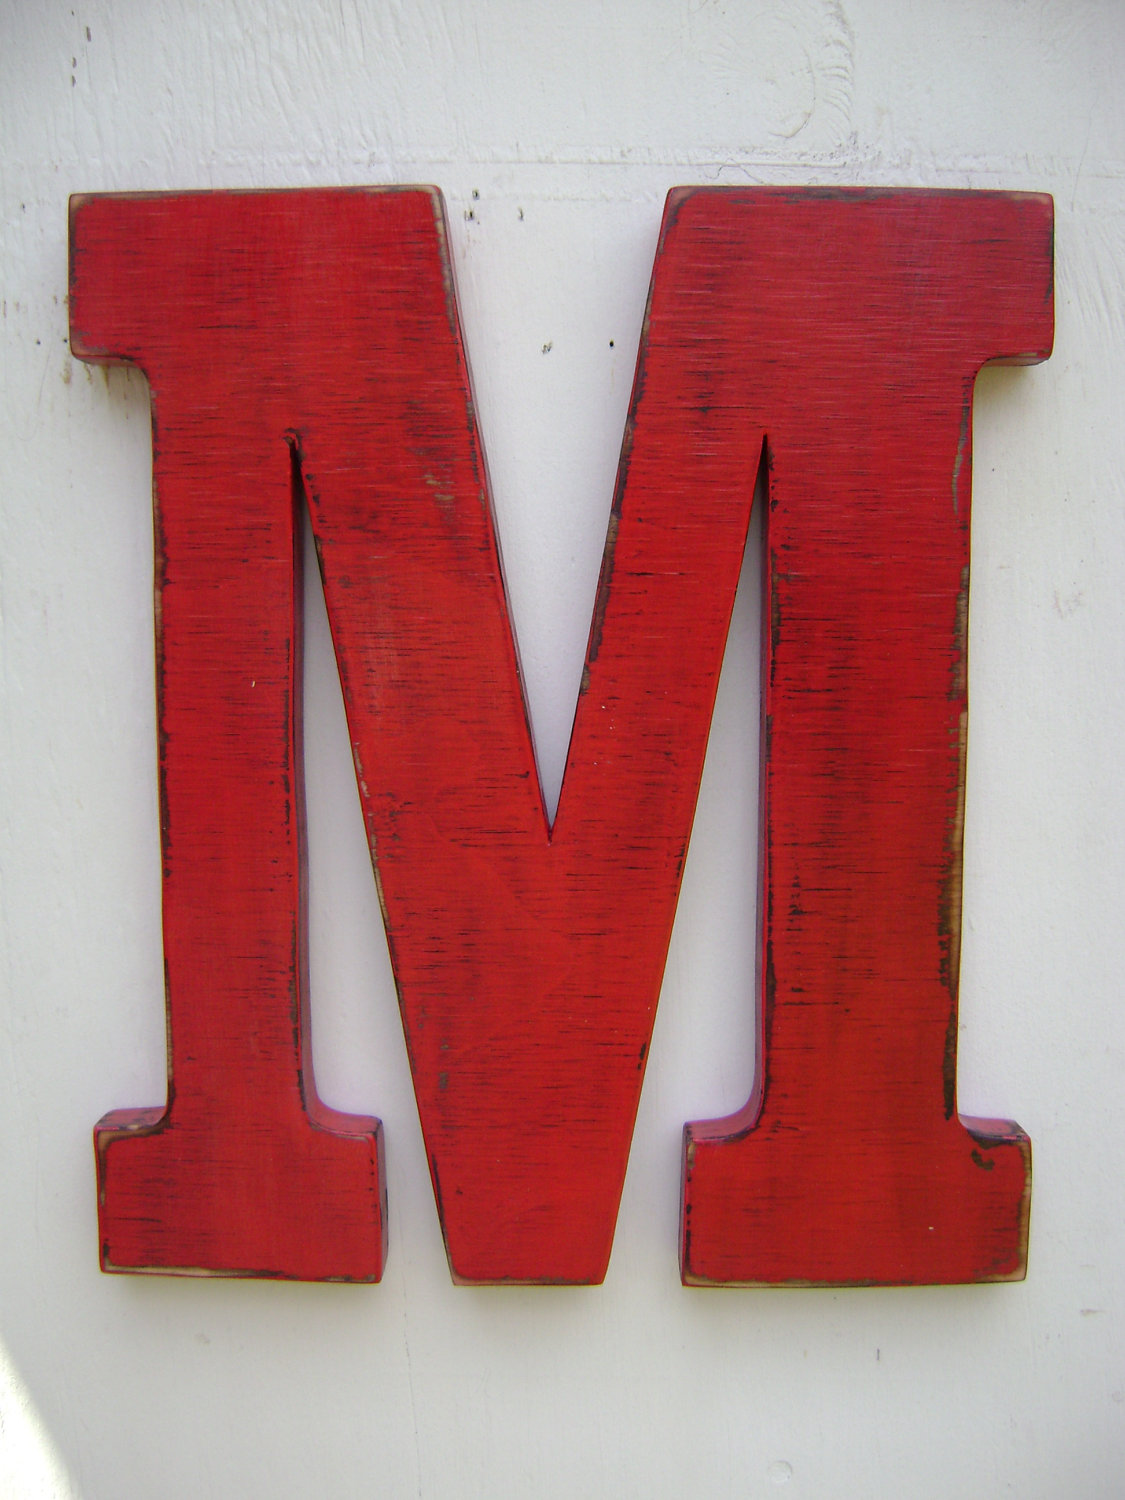 Shabby Chic Wedding Decor " M", Hanging Wood Letters,nursery Letters,12" Tall Wooden Letter,painted True